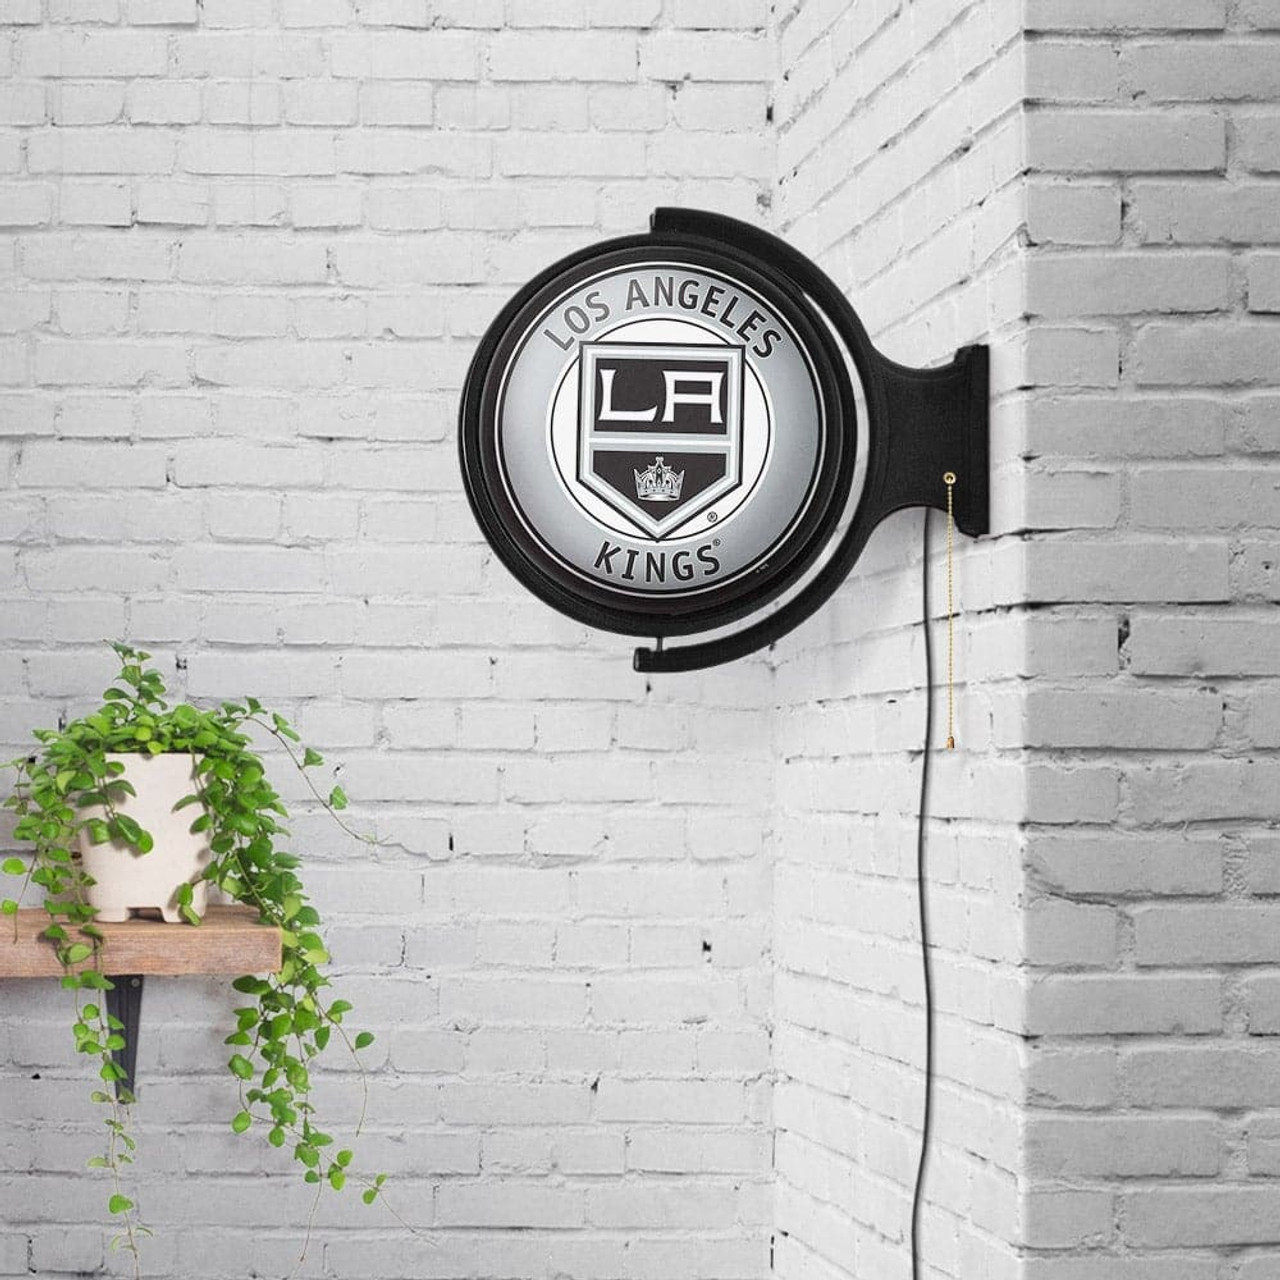 Los Angeles Kings: Original Round Rotating Lighted Wall Sign